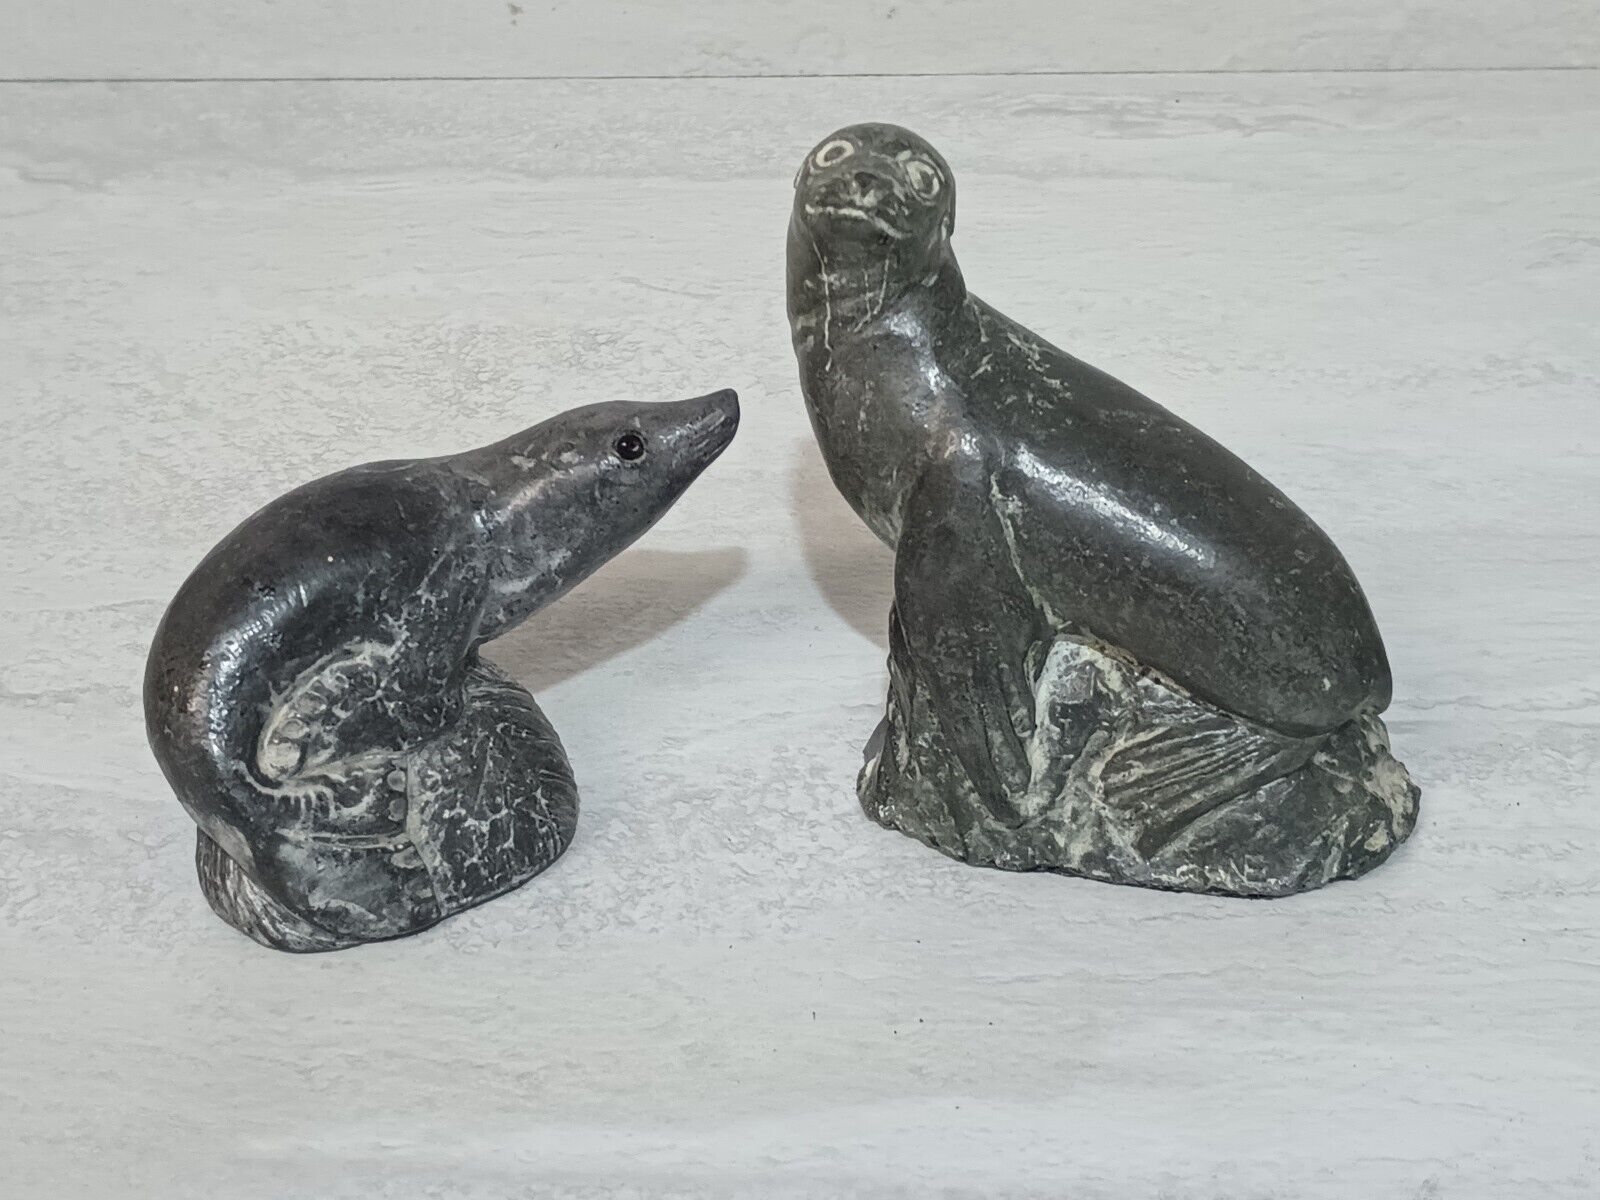 The Wolf Sculptures - A Wolf Original - Seal Sea Lion Figurine Soapstone Carving